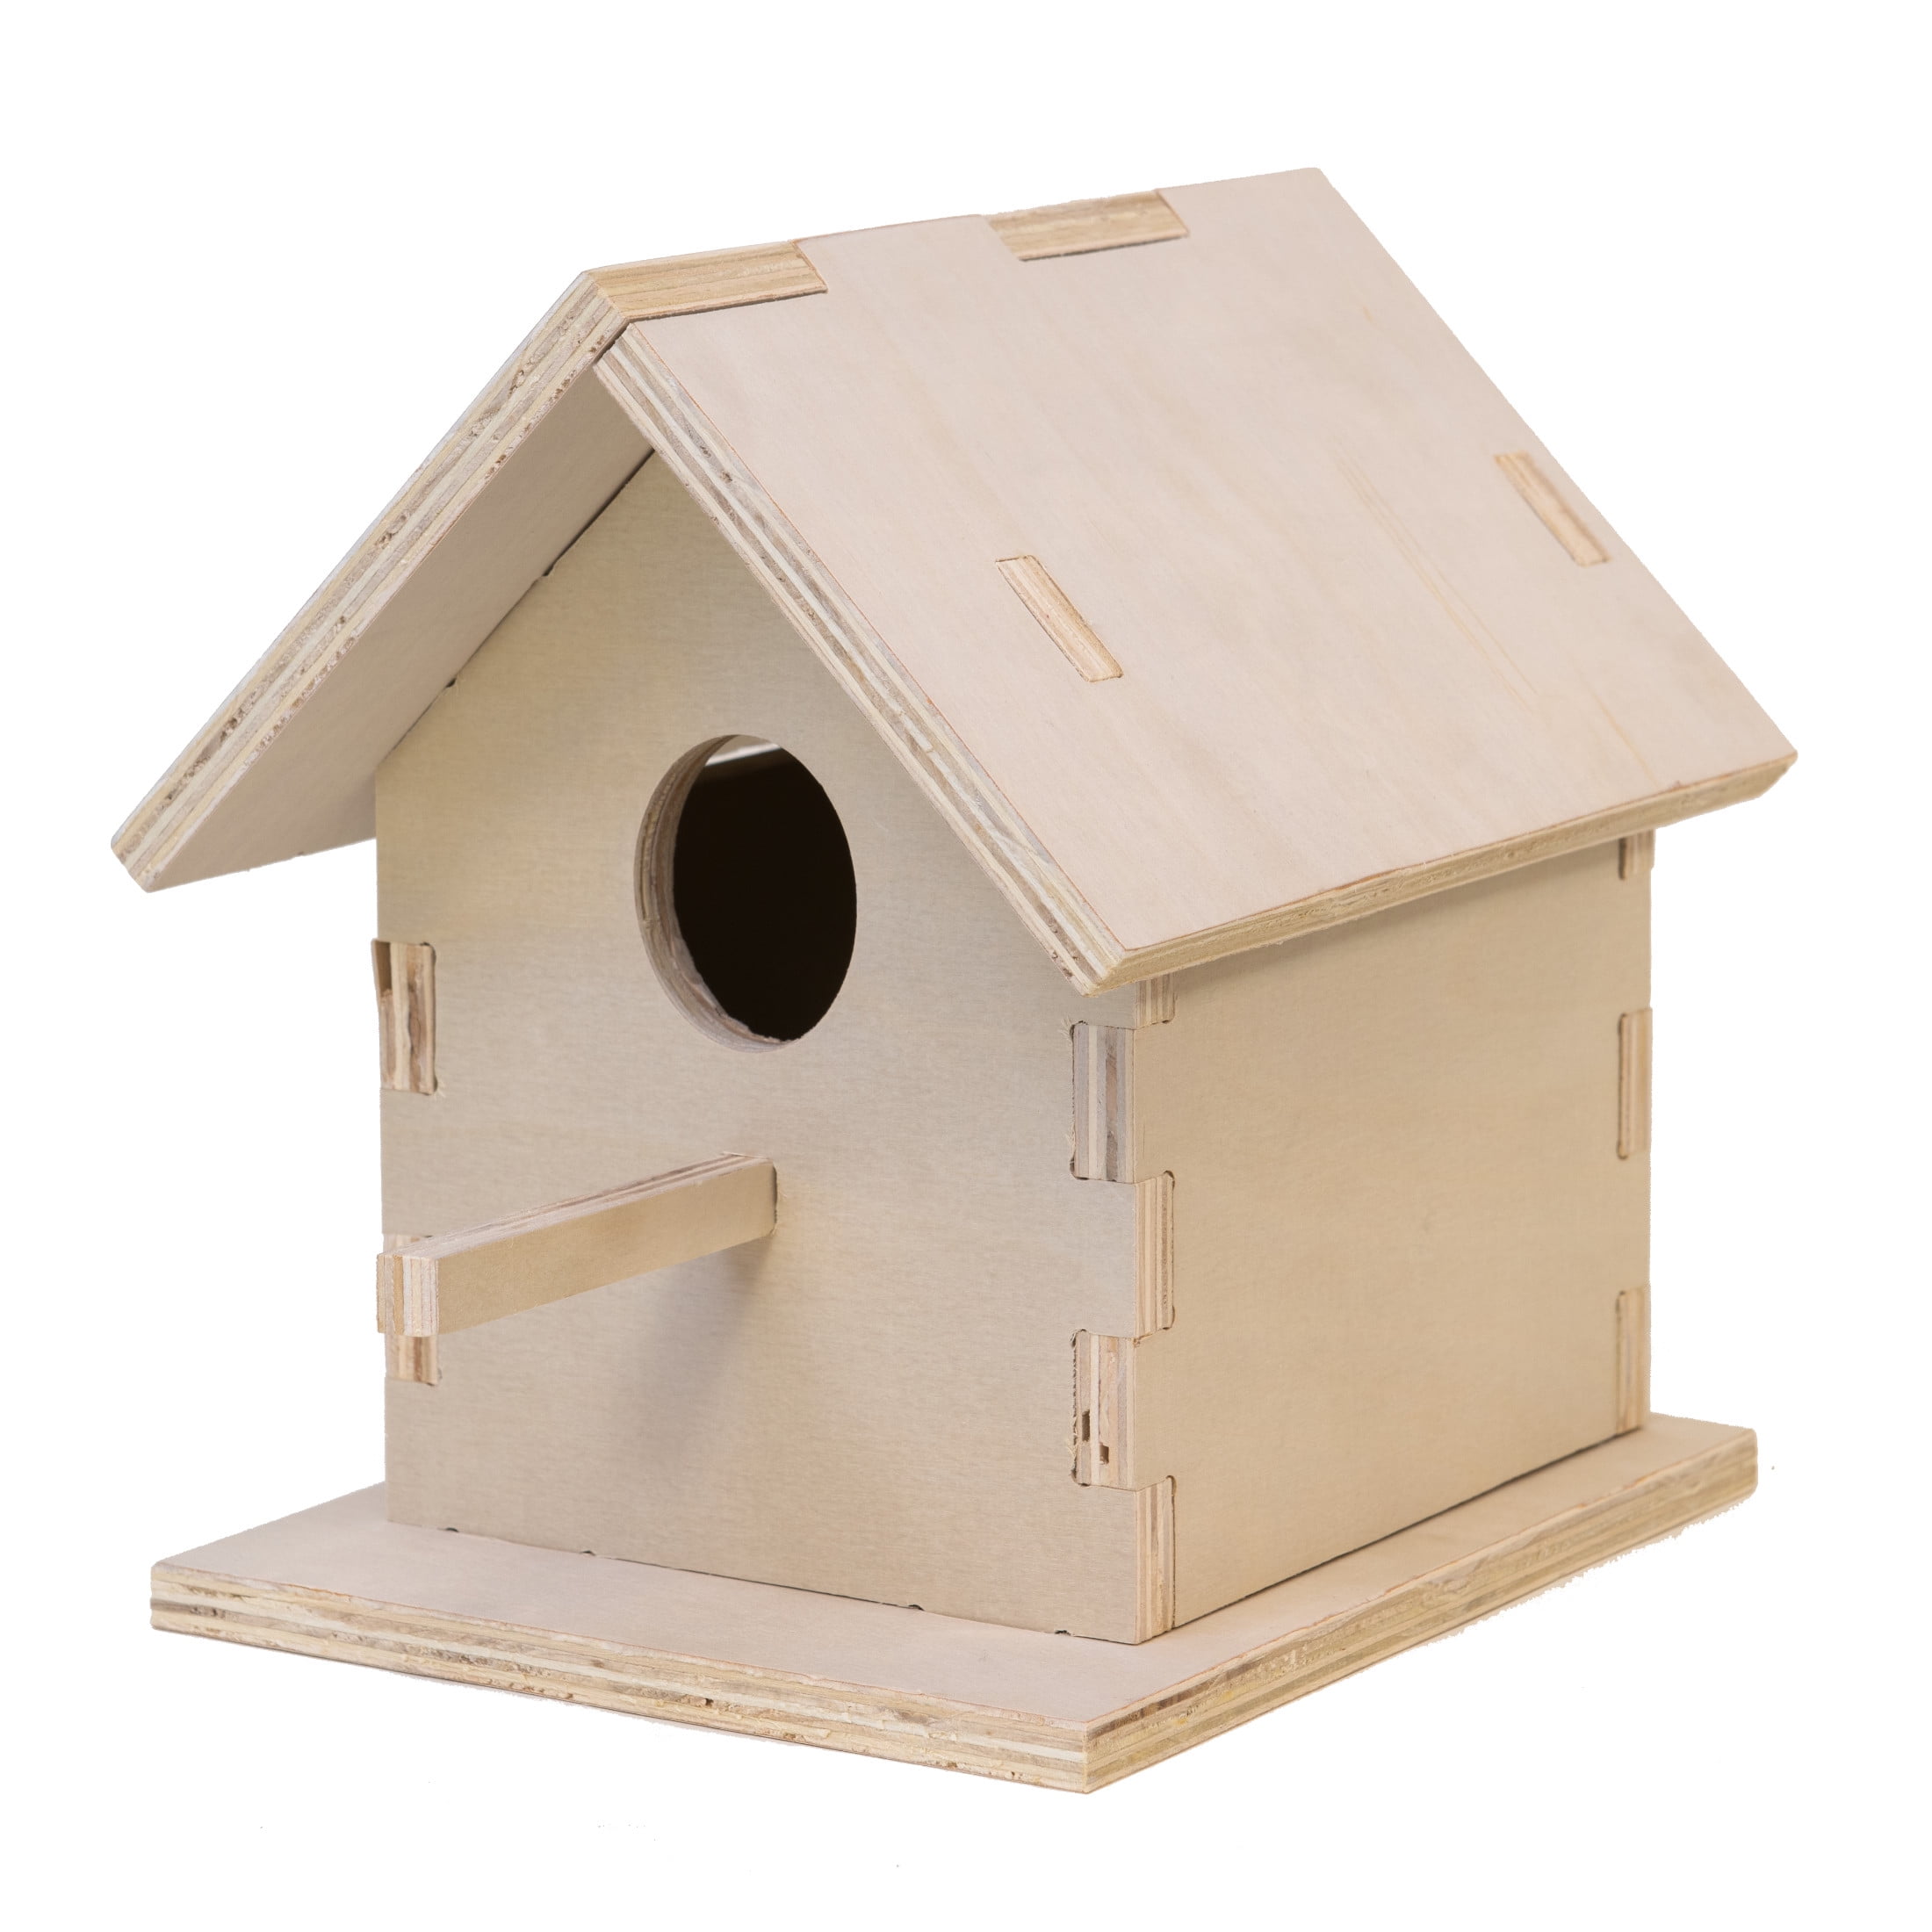 MINI Unfinished 4" WOOD BARN BIRDHOUSE Paint Stain Outdoor Craft DIY Project NEW 